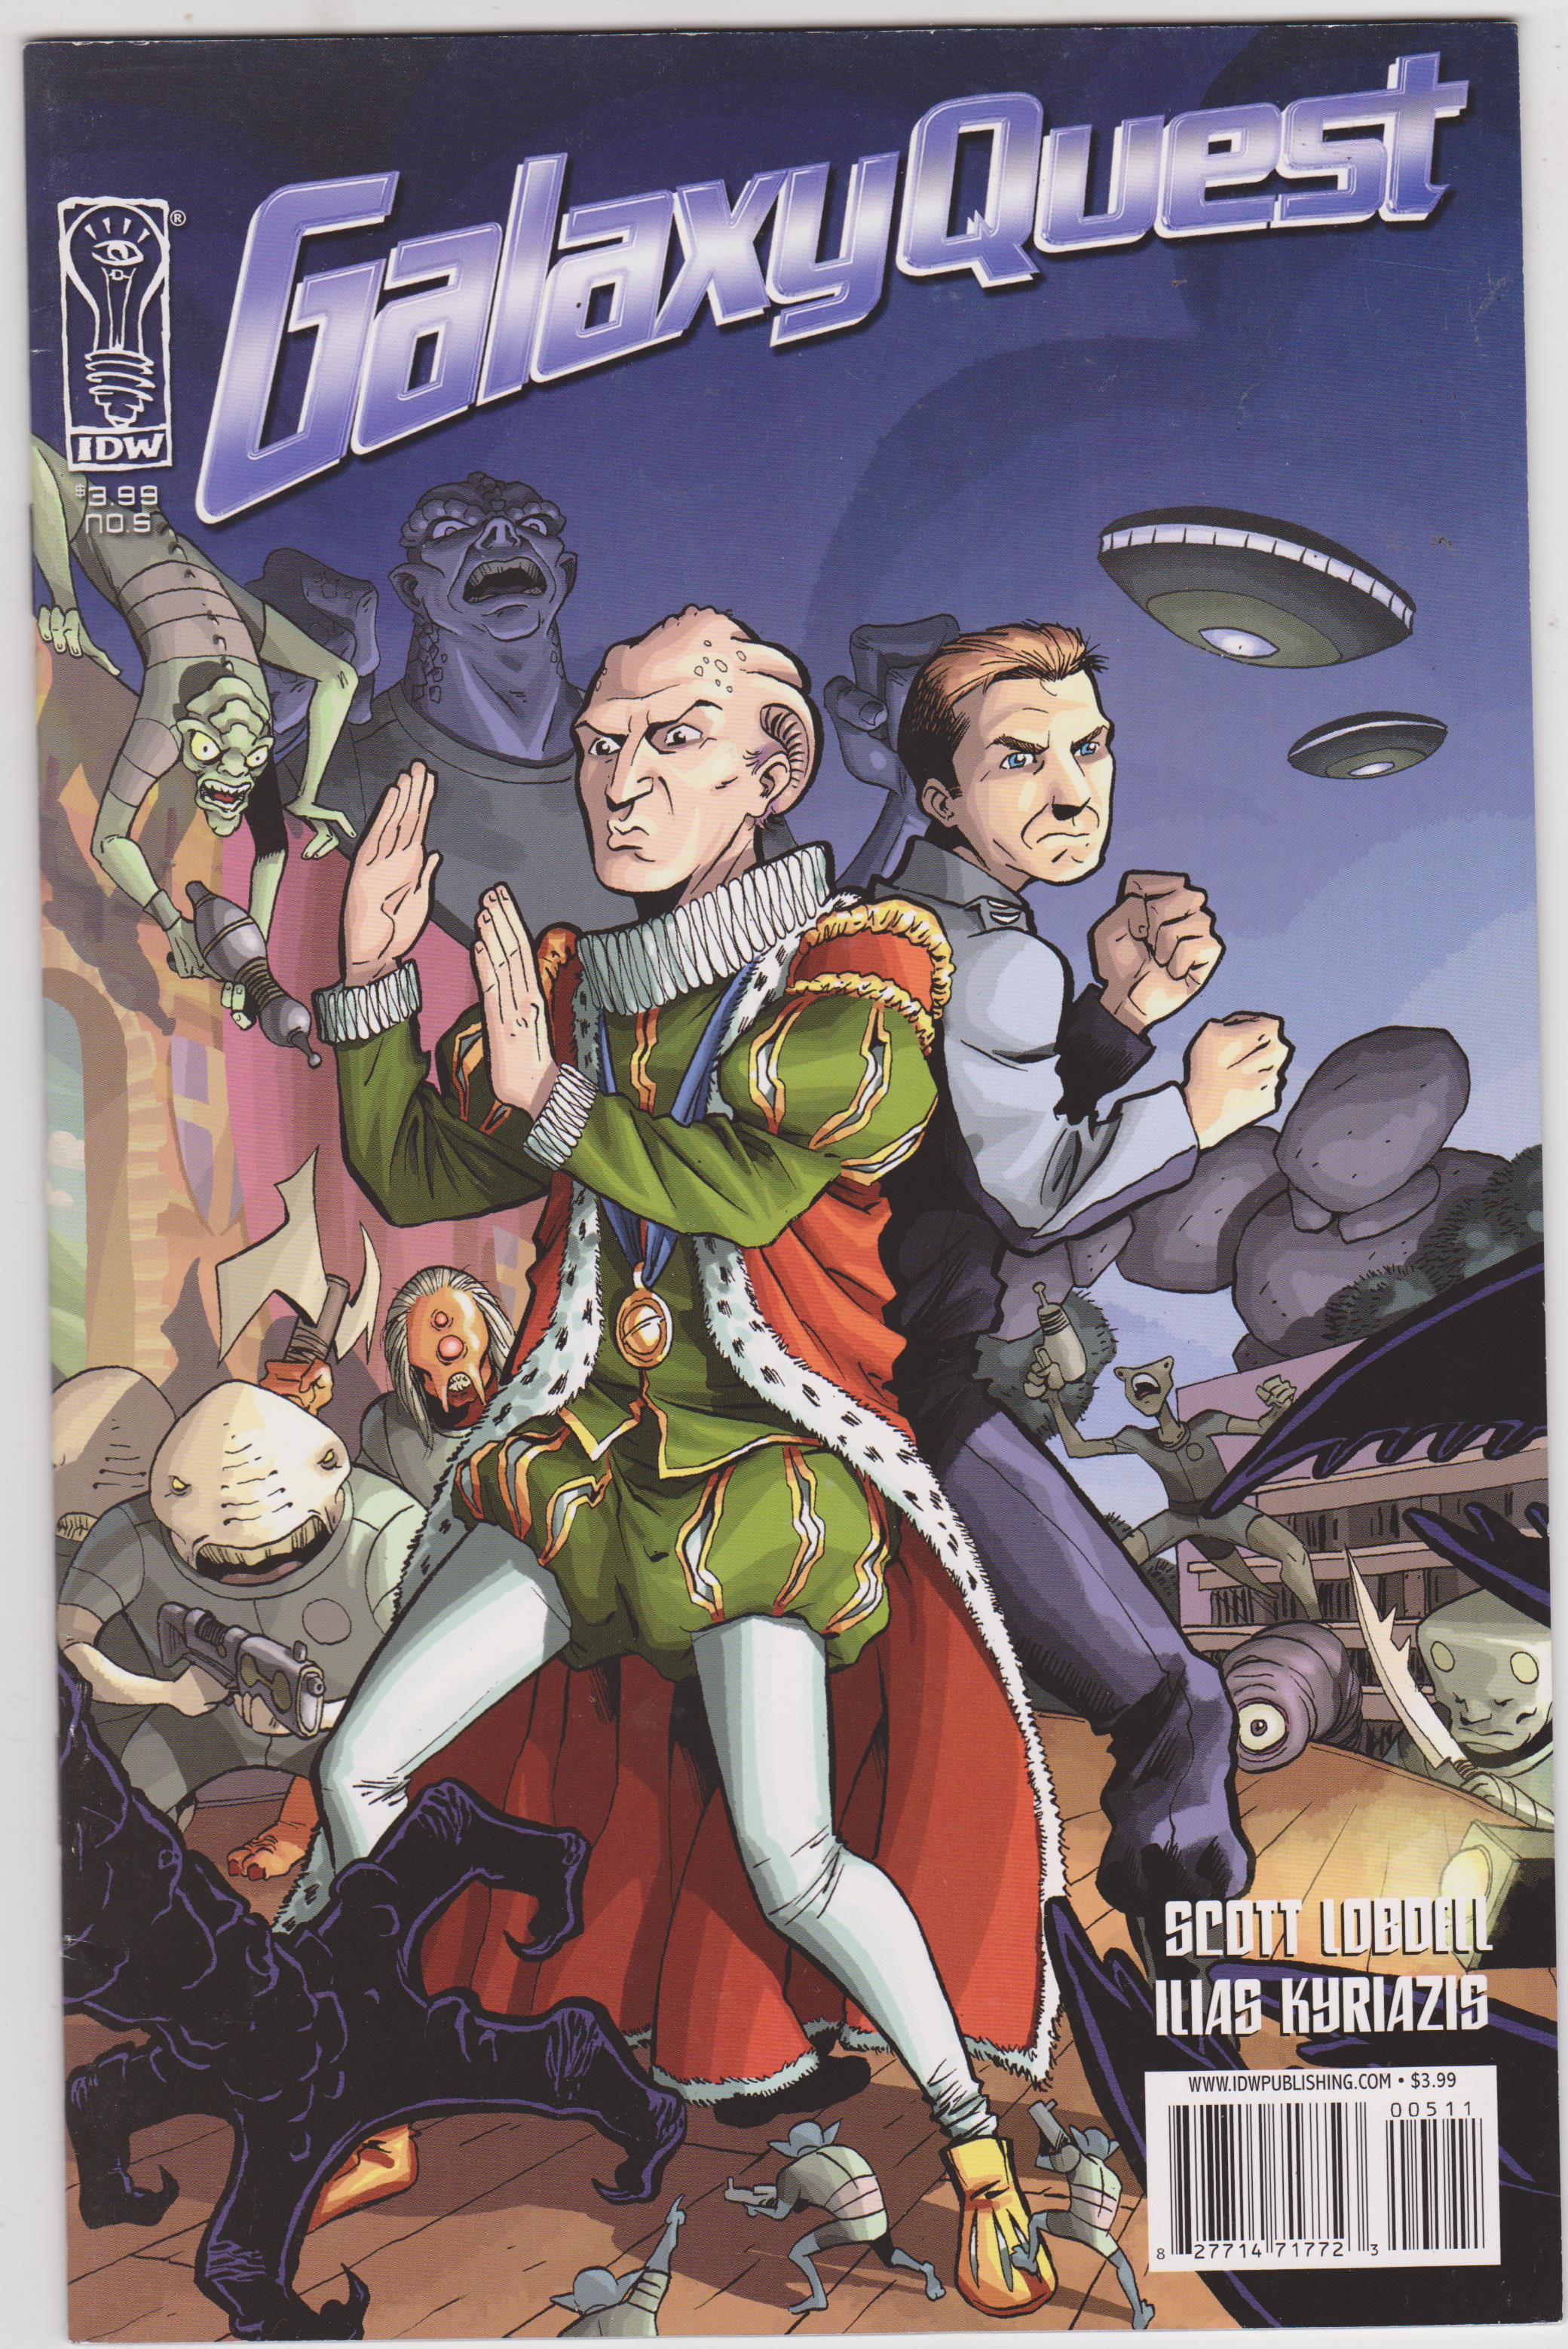 GALAXY QUEST THE JOURNEY CONTINUES GRAPHIC NOVEL New Paperback Collects #1-4 